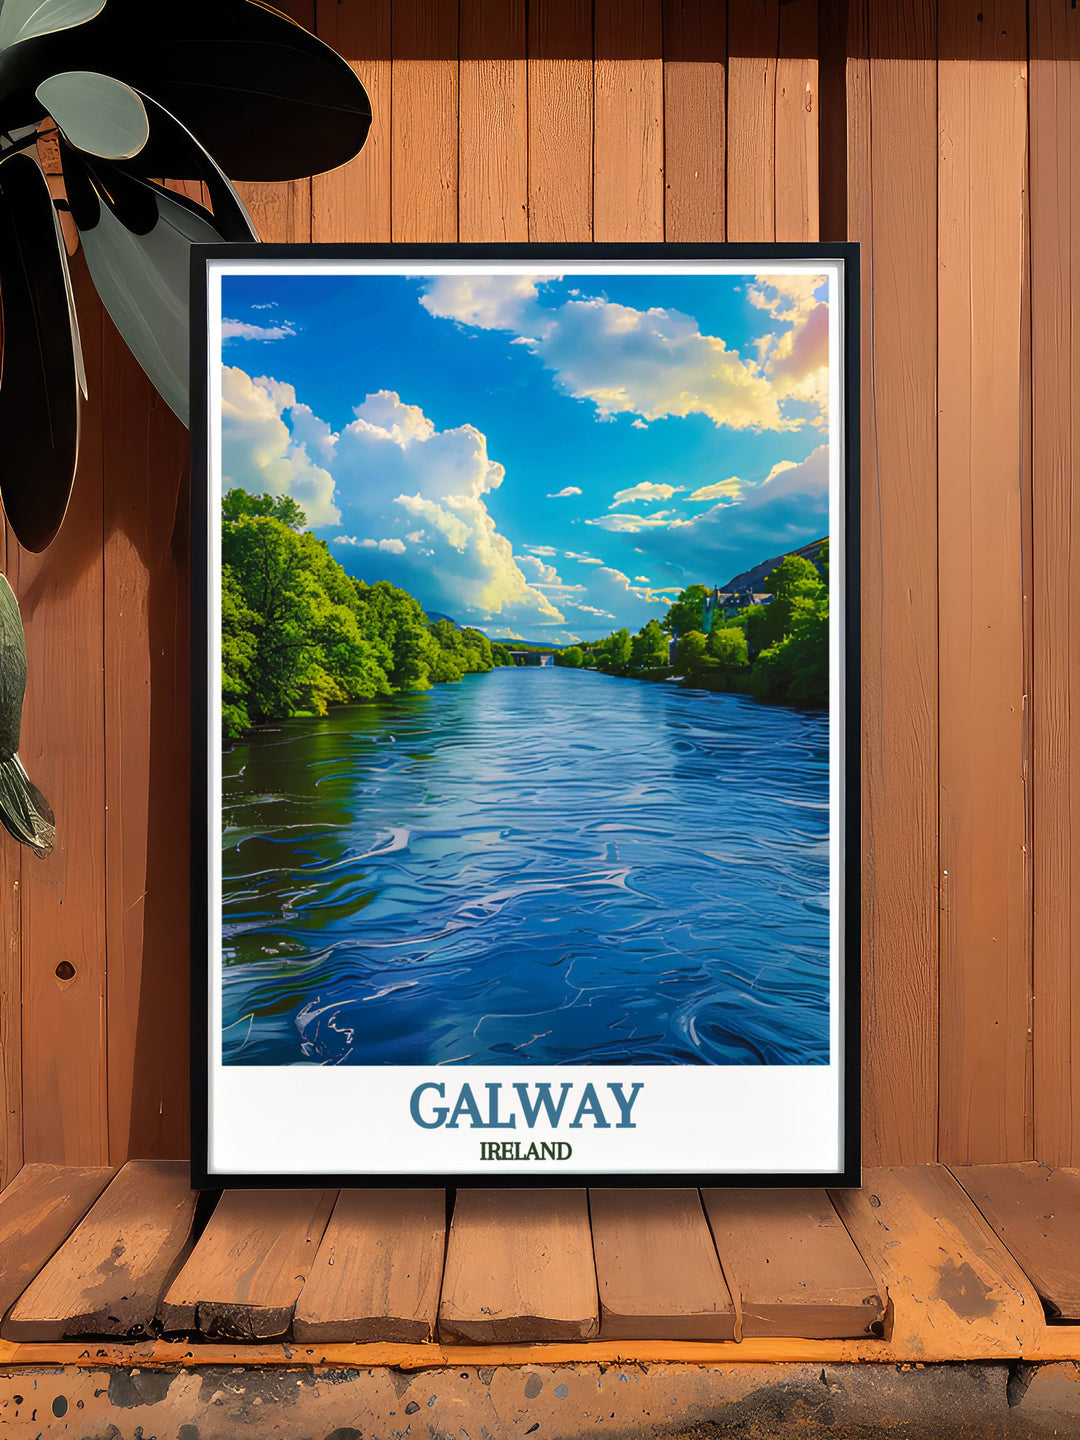 This detailed art print brings to life the calming and picturesque landscapes of the River Corrib. Featuring tranquil waters and scenic views, this poster is ideal for those who dream of peaceful riverbank escapes and the beauty of Irelands natural splendor.